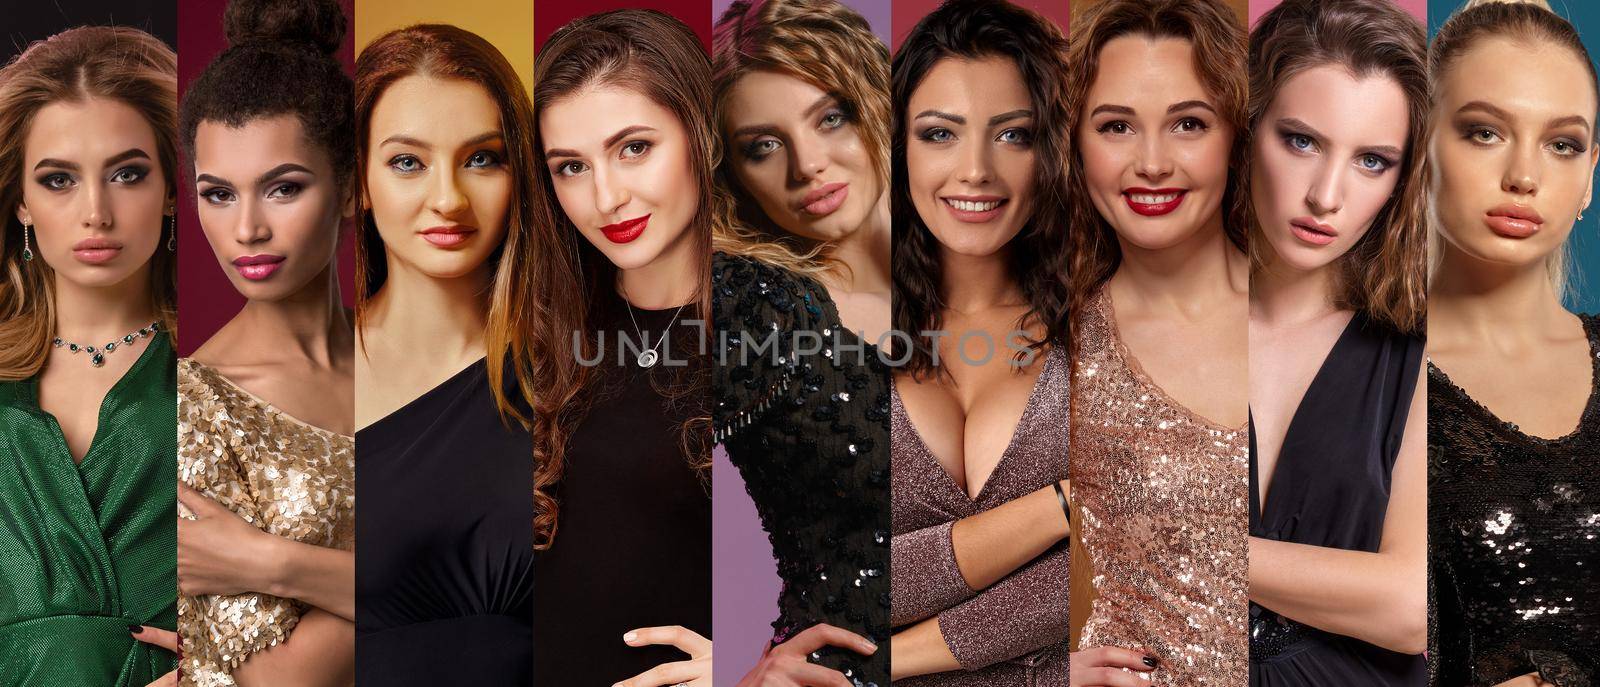 Collage of young girls in stylish dresses and jewelry. They expressing different facial emotions. Posing on colorful backgrounds. Close-up by nazarovsergey